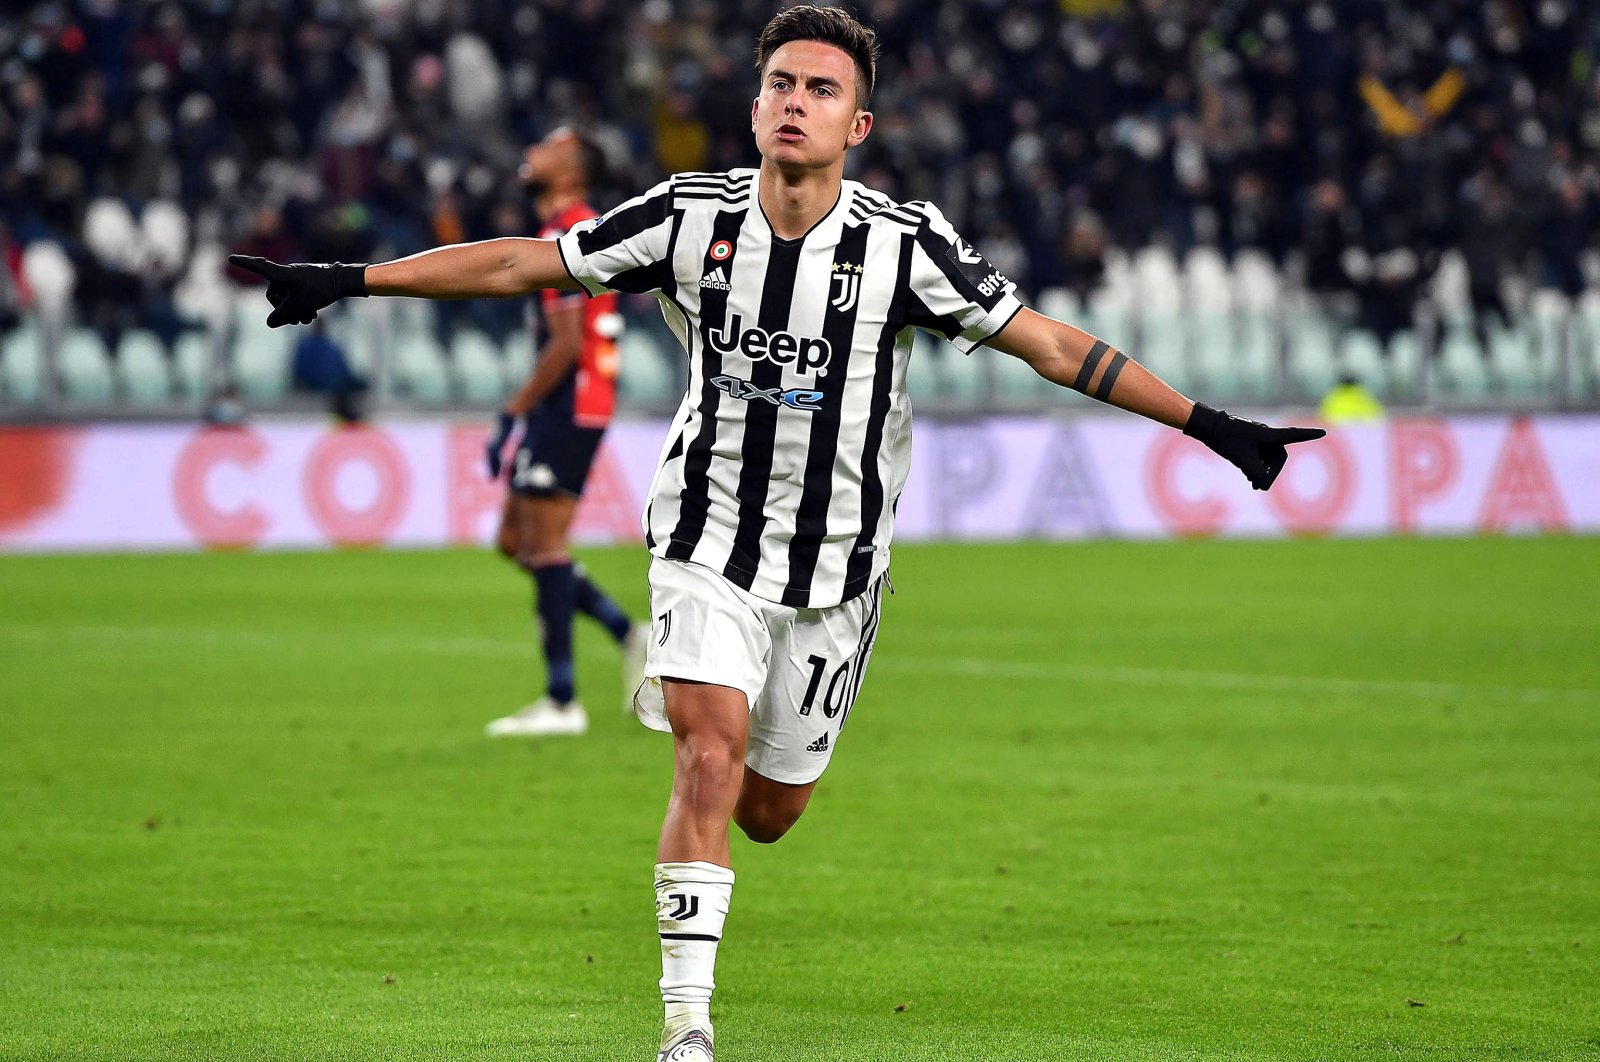 Juventus&#039; Paulo Dybala celebrates after scoring in a Serie A match against Genoa, Turin, Italy, Dec. 5, 2021. (EPA Photo)